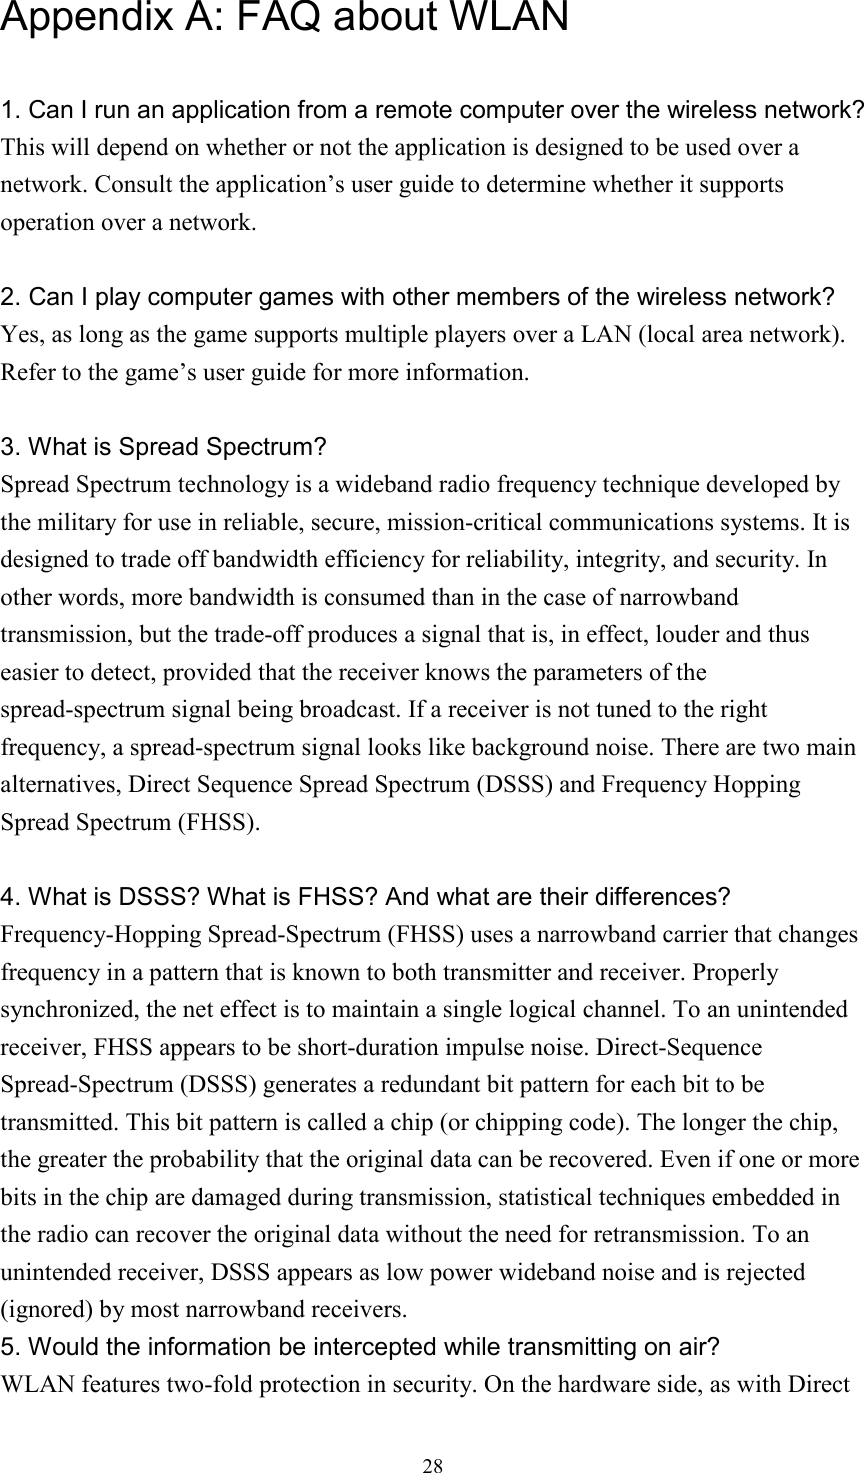 28Appendix A: FAQ about WLAN 1. Can I run an application from a remote computer over the wireless network? This will depend on whether or not the application is designed to be used over a network. Consult the application’s user guide to determine whether it supports operation over a network. 2. Can I play computer games with other members of the wireless network? Yes, as long as the game supports multiple players over a LAN (local area network). Refer to the game’s user guide for more information. 3. What is Spread Spectrum? Spread Spectrum technology is a wideband radio frequency technique developed by the military for use in reliable, secure, mission-critical communications systems. It is designed to trade off bandwidth efficiency for reliability, integrity, and security. In other words, more bandwidth is consumed than in the case of narrowband transmission, but the trade-off produces a signal that is, in effect, louder and thus easier to detect, provided that the receiver knows the parameters of the spread-spectrum signal being broadcast. If a receiver is not tuned to the right frequency, a spread-spectrum signal looks like background noise. There are two main alternatives, Direct Sequence Spread Spectrum (DSSS) and Frequency Hopping Spread Spectrum (FHSS). 4. What is DSSS? What is FHSS? And what are their differences? Frequency-Hopping Spread-Spectrum (FHSS) uses a narrowband carrier that changes frequency in a pattern that is known to both transmitter and receiver. Properly synchronized, the net effect is to maintain a single logical channel. To an unintended receiver, FHSS appears to be short-duration impulse noise. Direct-Sequence Spread-Spectrum (DSSS) generates a redundant bit pattern for each bit to be transmitted. This bit pattern is called a chip (or chipping code). The longer the chip, the greater the probability that the original data can be recovered. Even if one or more bits in the chip are damaged during transmission, statistical techniques embedded in the radio can recover the original data without the need for retransmission. To an unintended receiver, DSSS appears as low power wideband noise and is rejected (ignored) by most narrowband receivers. 5. Would the information be intercepted while transmitting on air? WLAN features two-fold protection in security. On the hardware side, as with Direct 